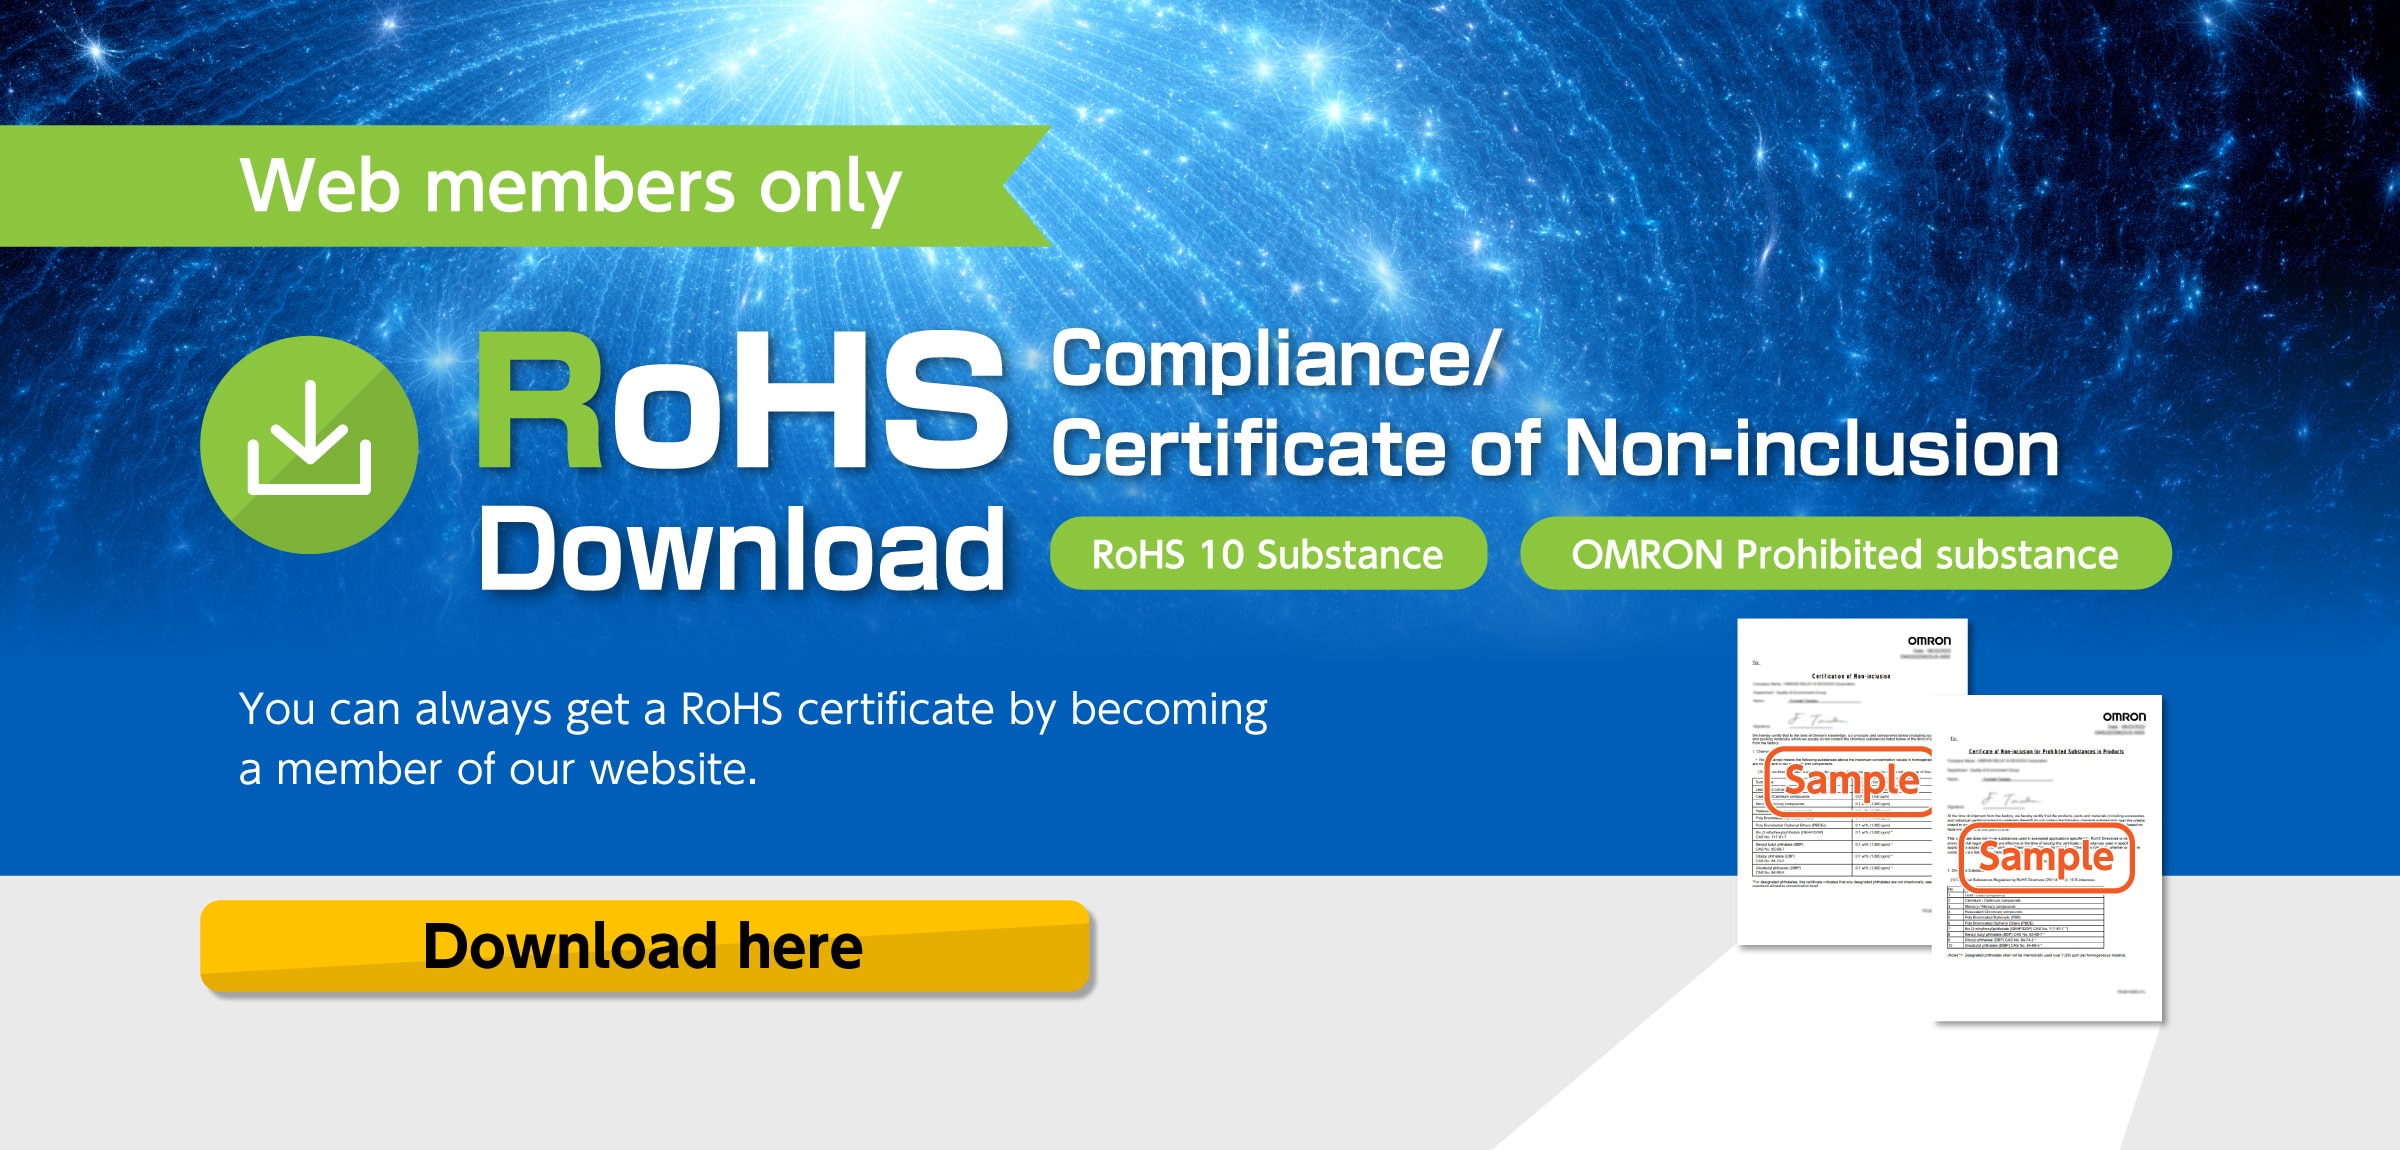 RoHS Compliance / Certificate of Non-inclusion Download